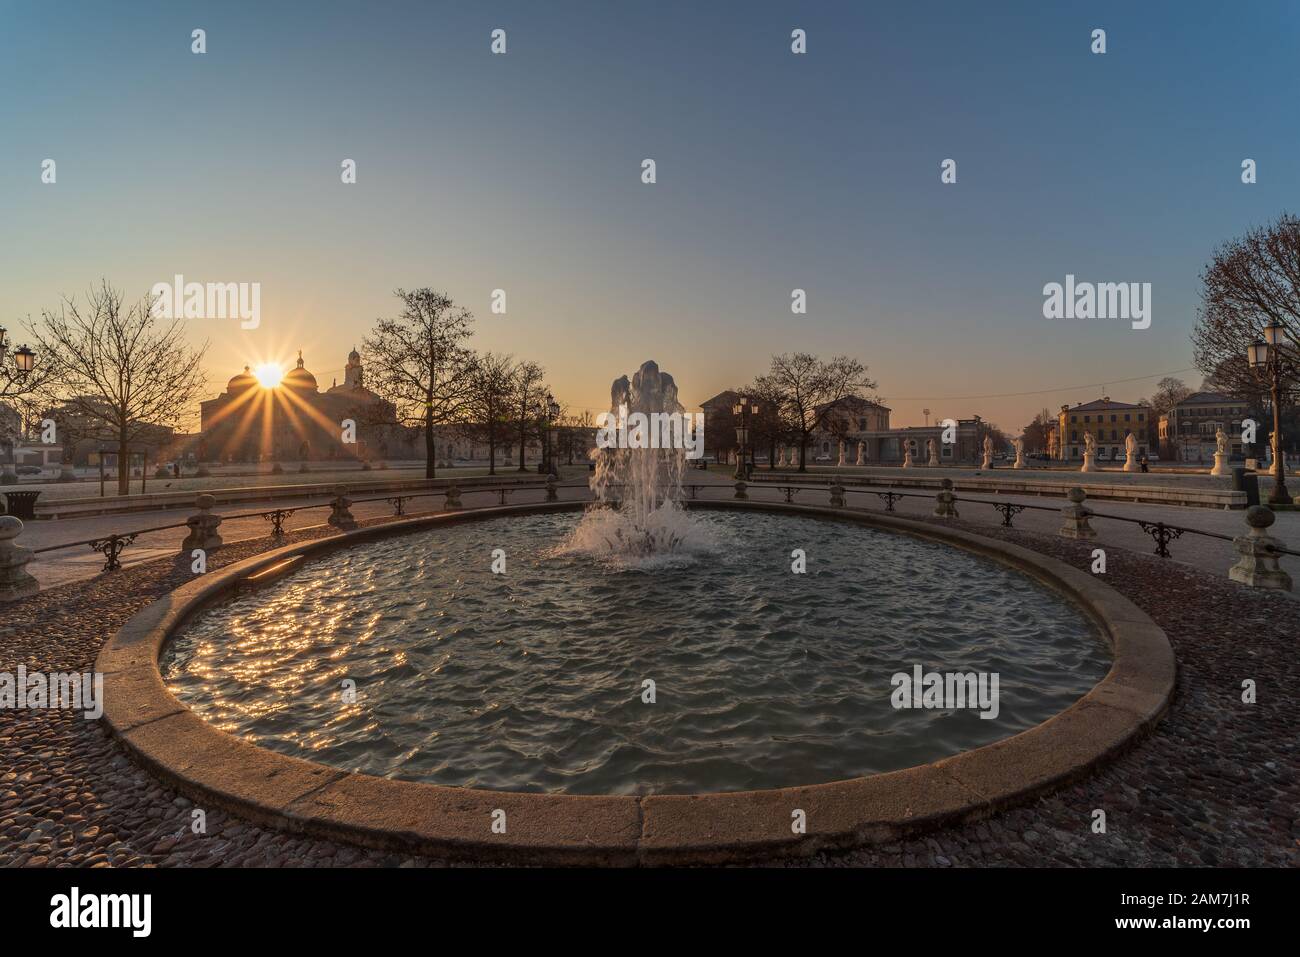 Prato della Valle, square in the city of Padua with the Memmia island surrounded by a canal surrounded by 87 statues, Italian cityscape Stock Photo